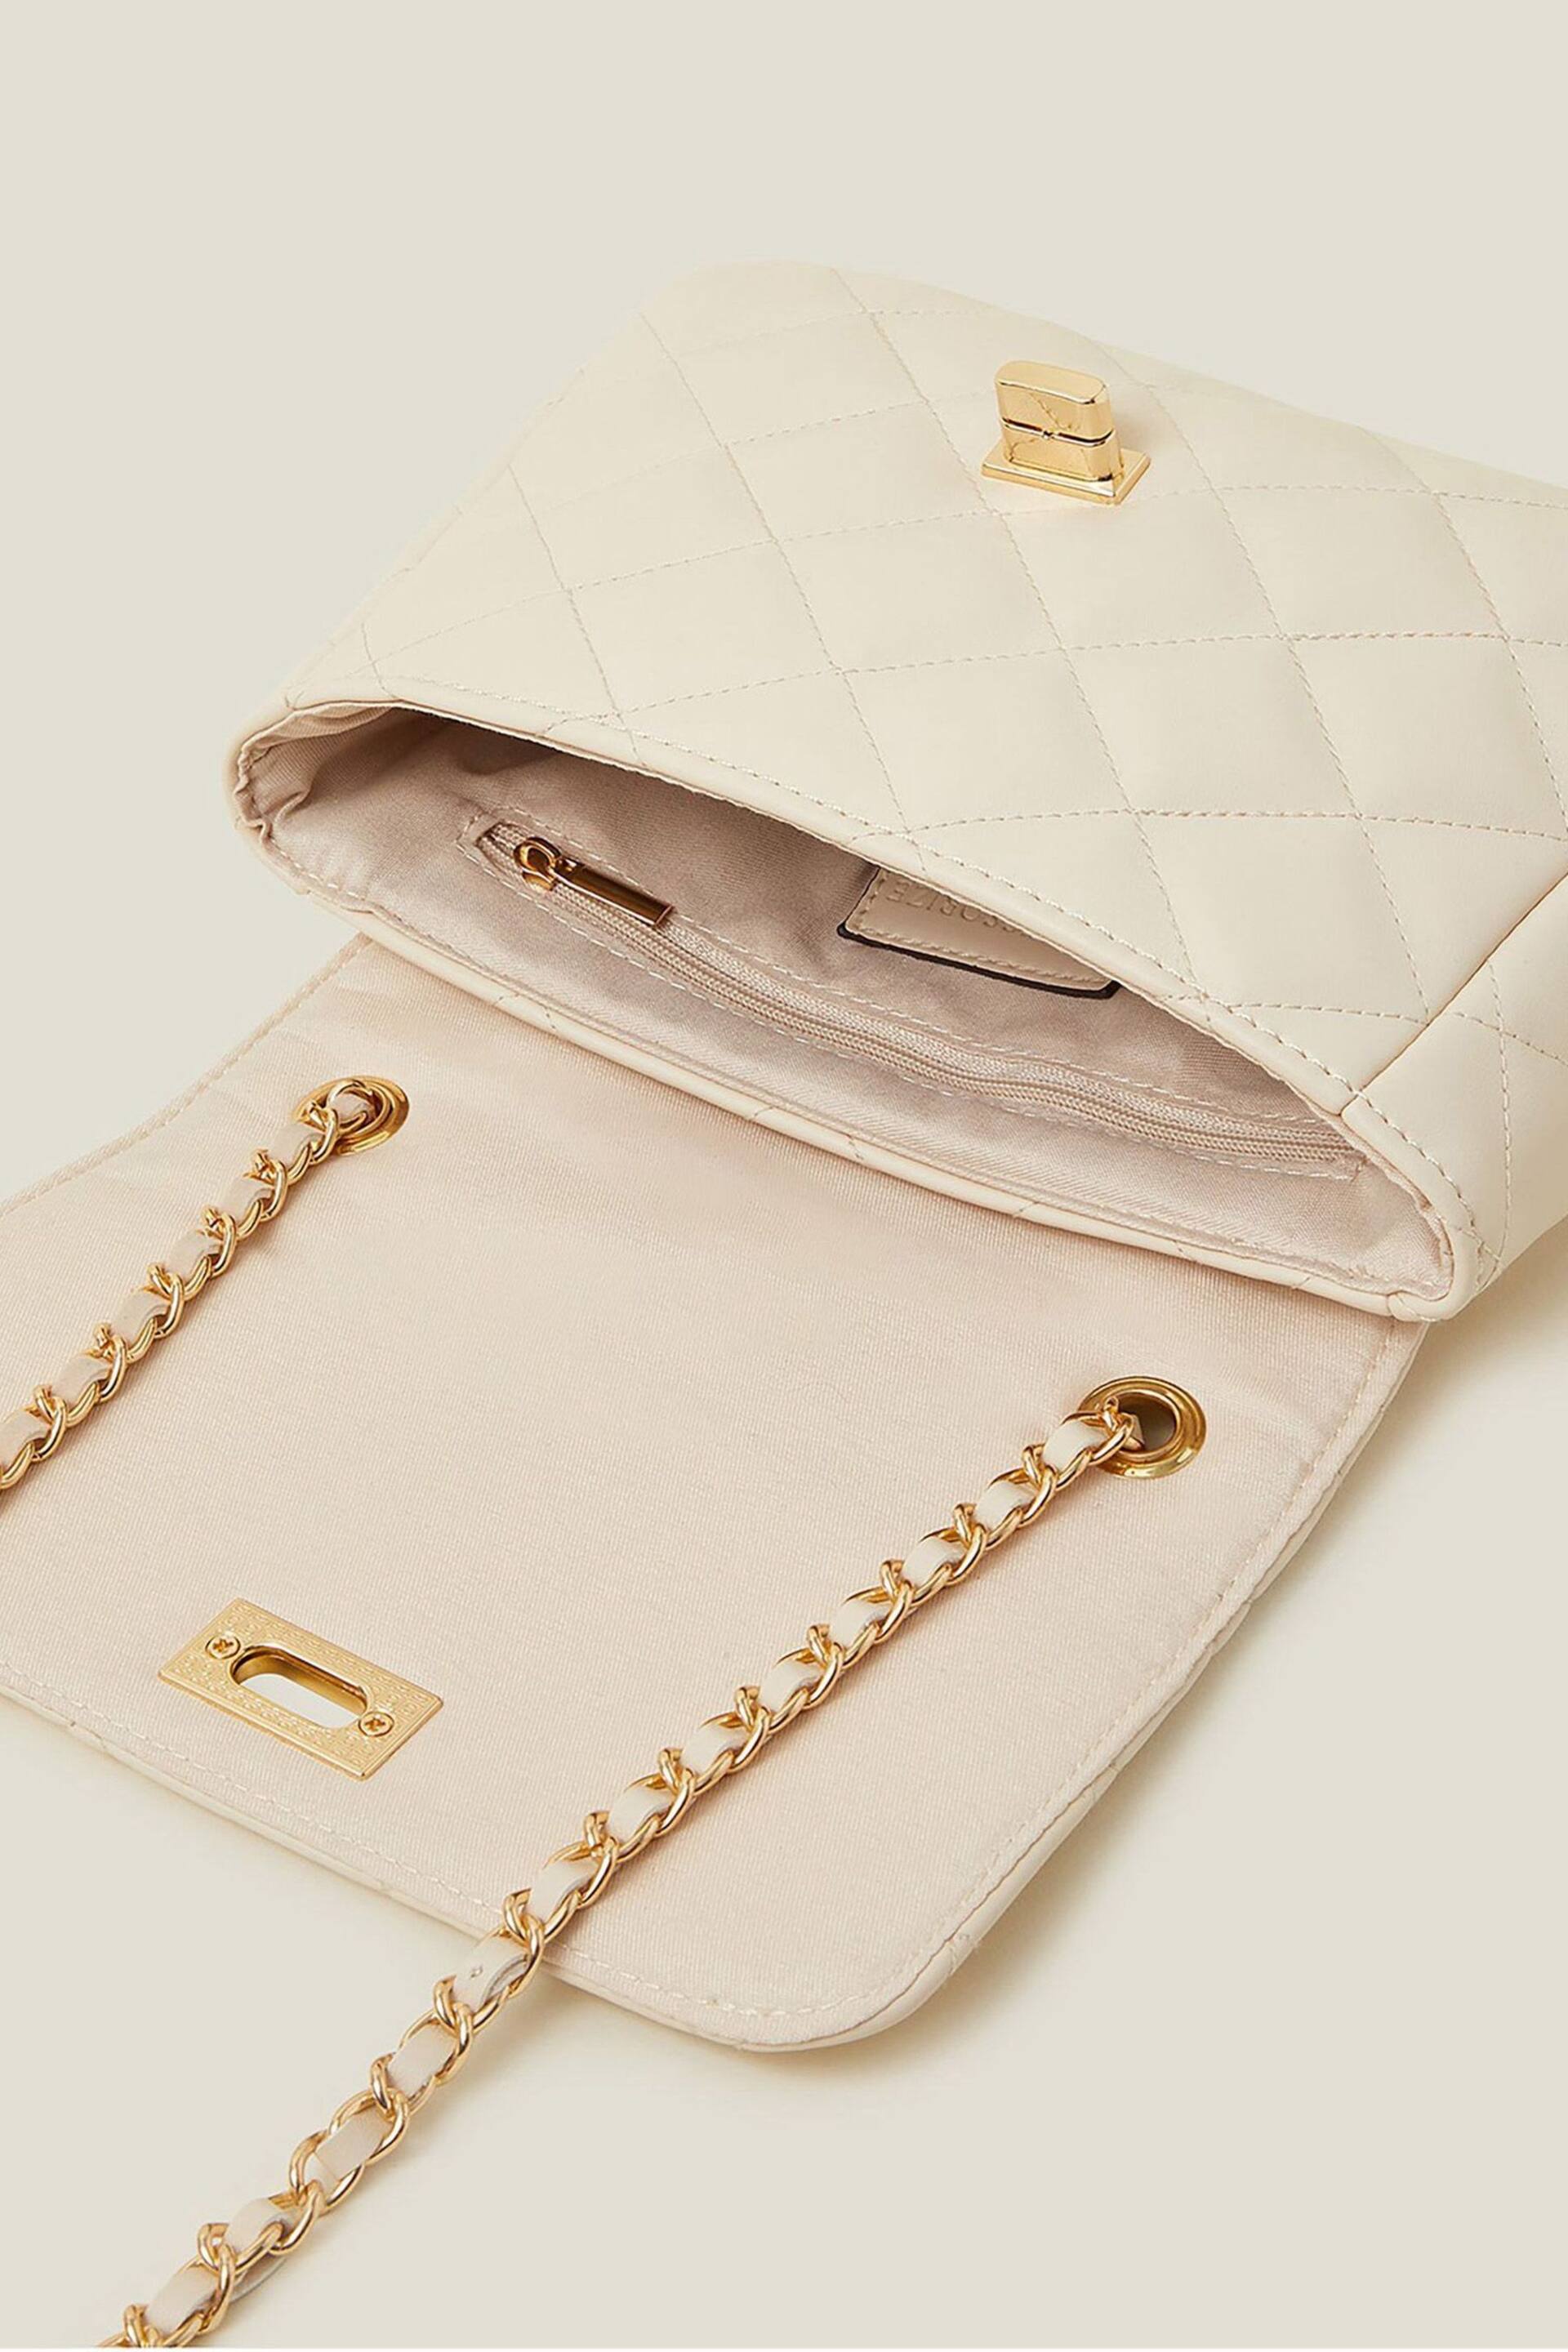 Accessorize Cream Quilted Cross-Body Bag - Image 4 of 4